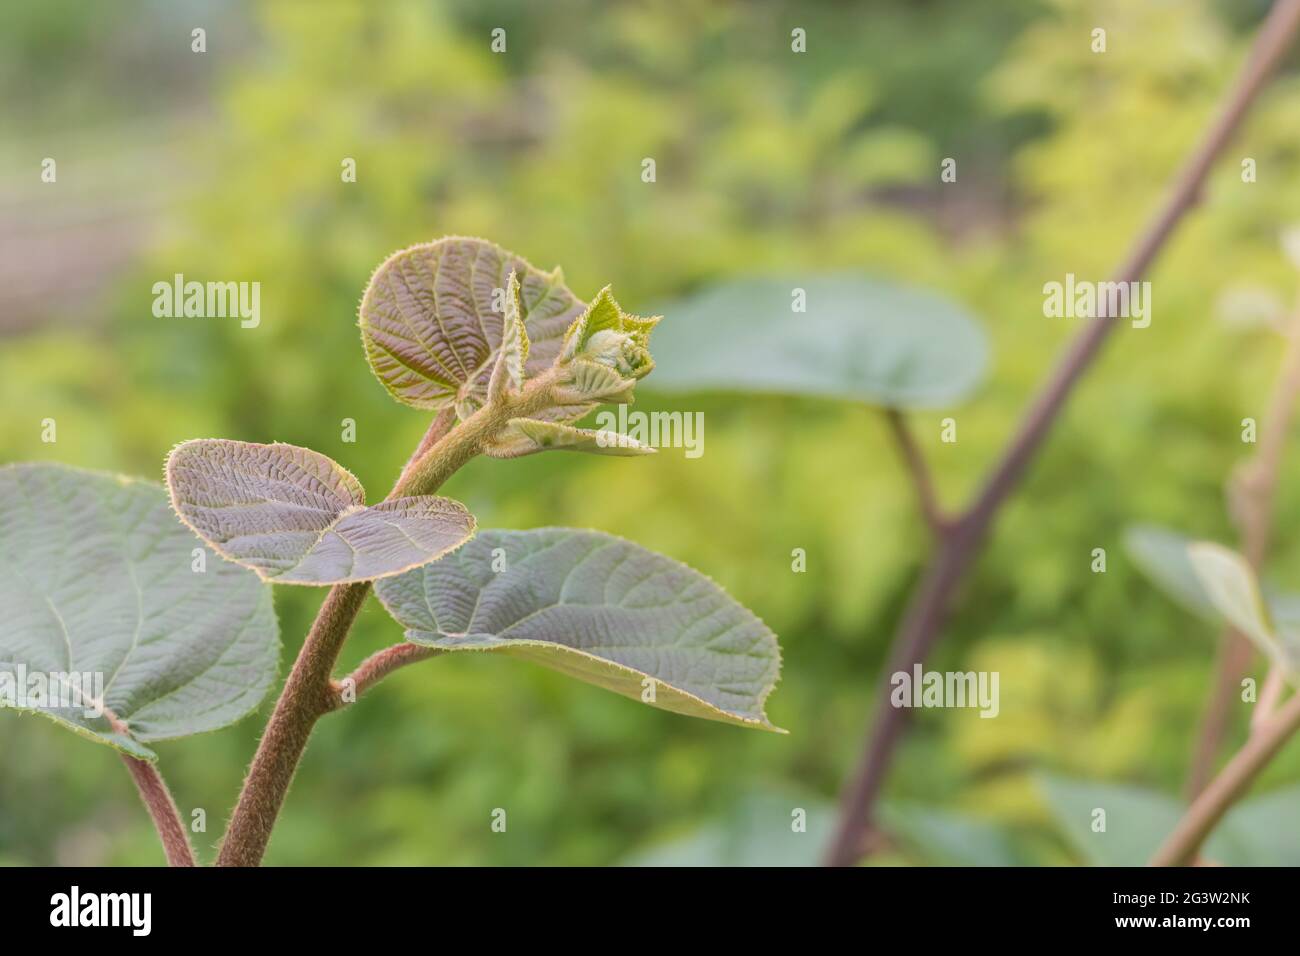 detail of kiwi plant sprout growing in outdoor vegetable garden with daylight Stock Photo